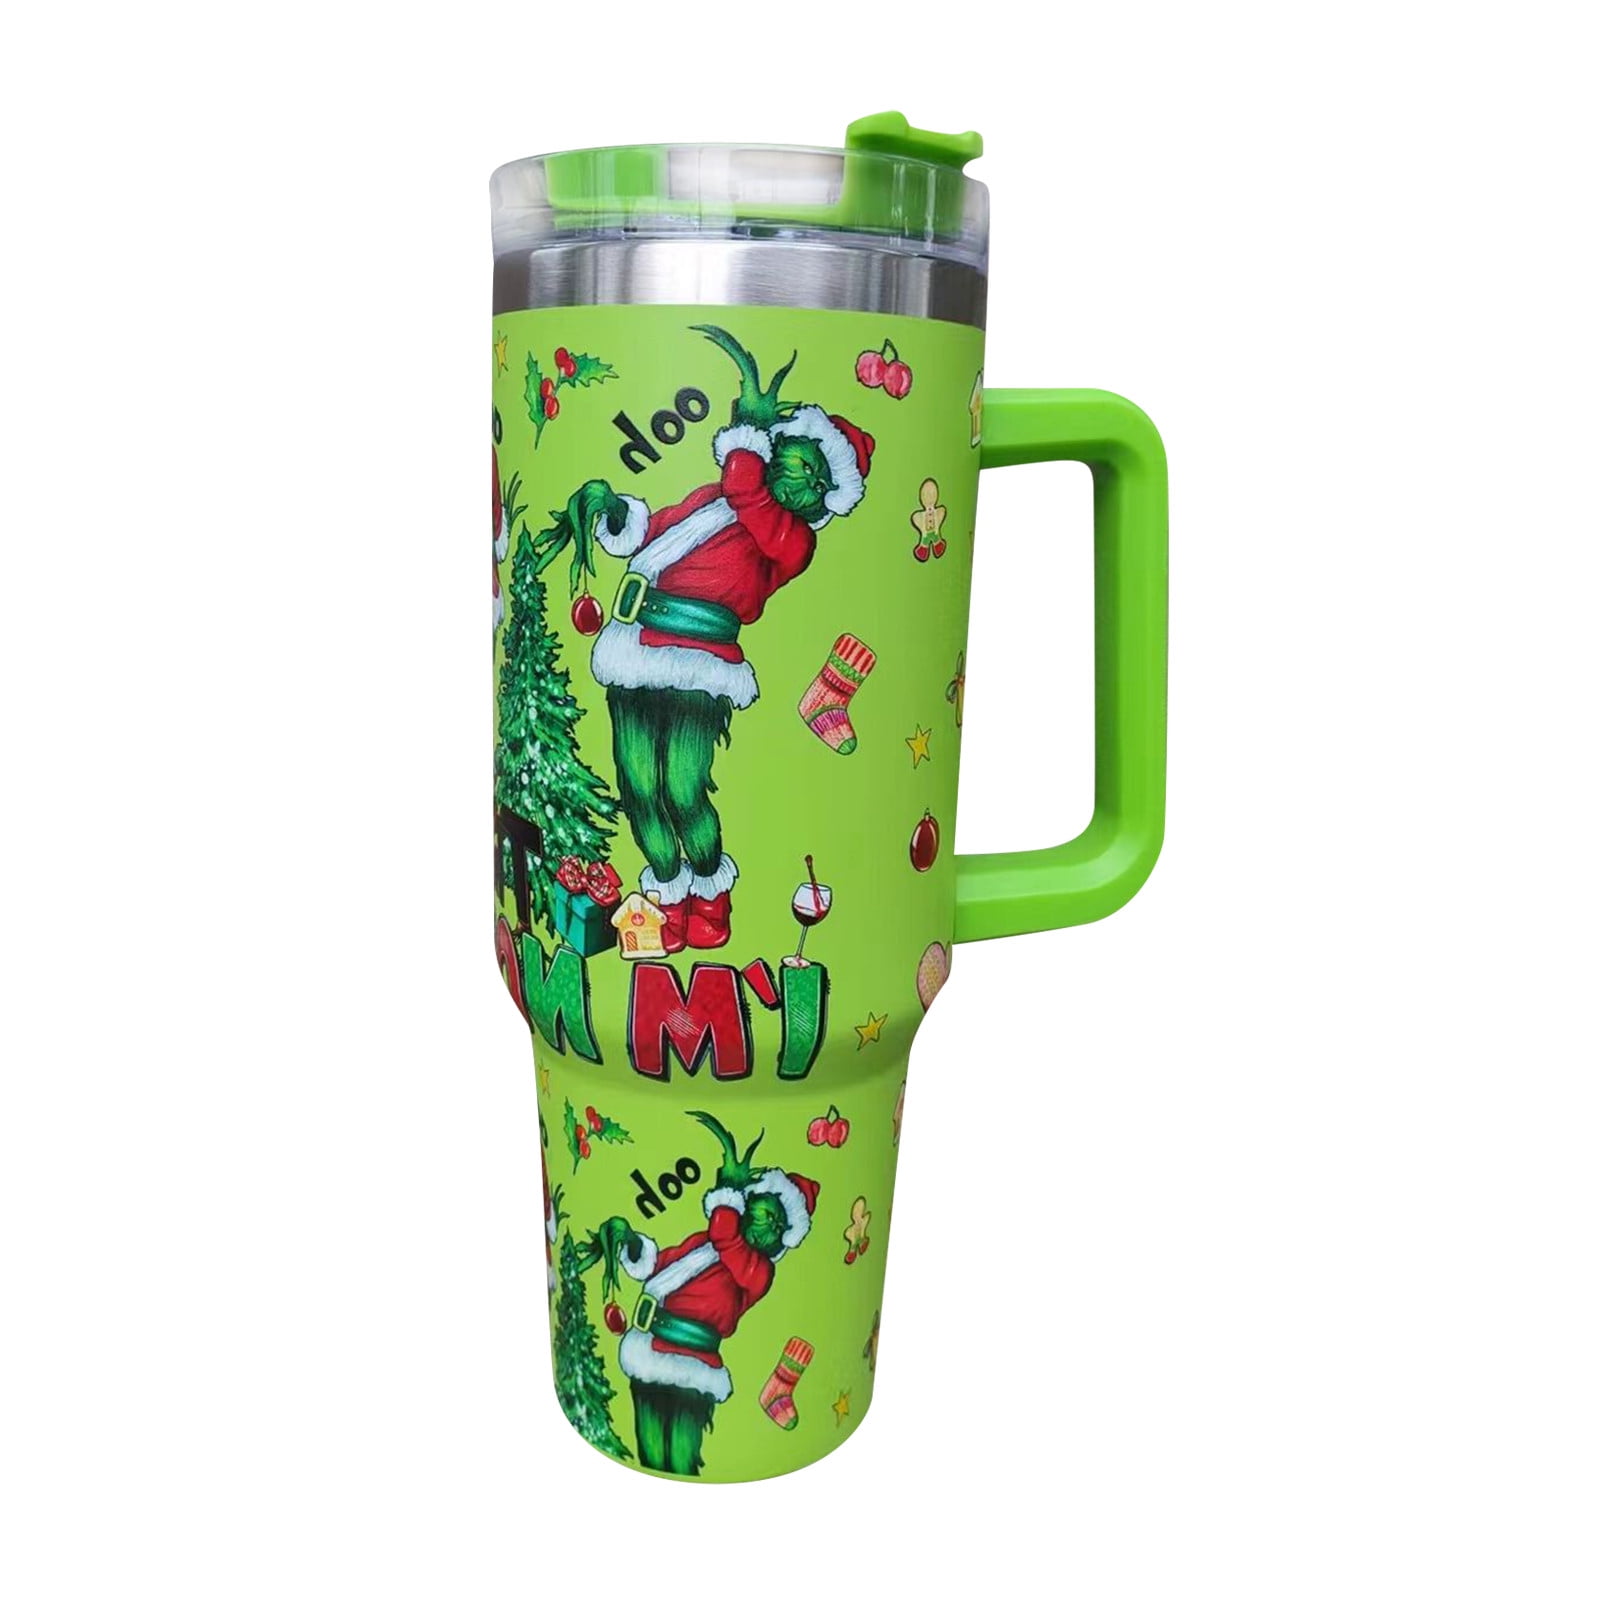 40 oz Tumbler with Handle and Lid, Grinch Tumbler Cup, Stainless Steel Grinch  Cup Reusable Insulated Cup and Water Tumbler Cup with Grinch Pateern, Best  Christmas Gifts for Car Cup Holder,Travel,Gym 